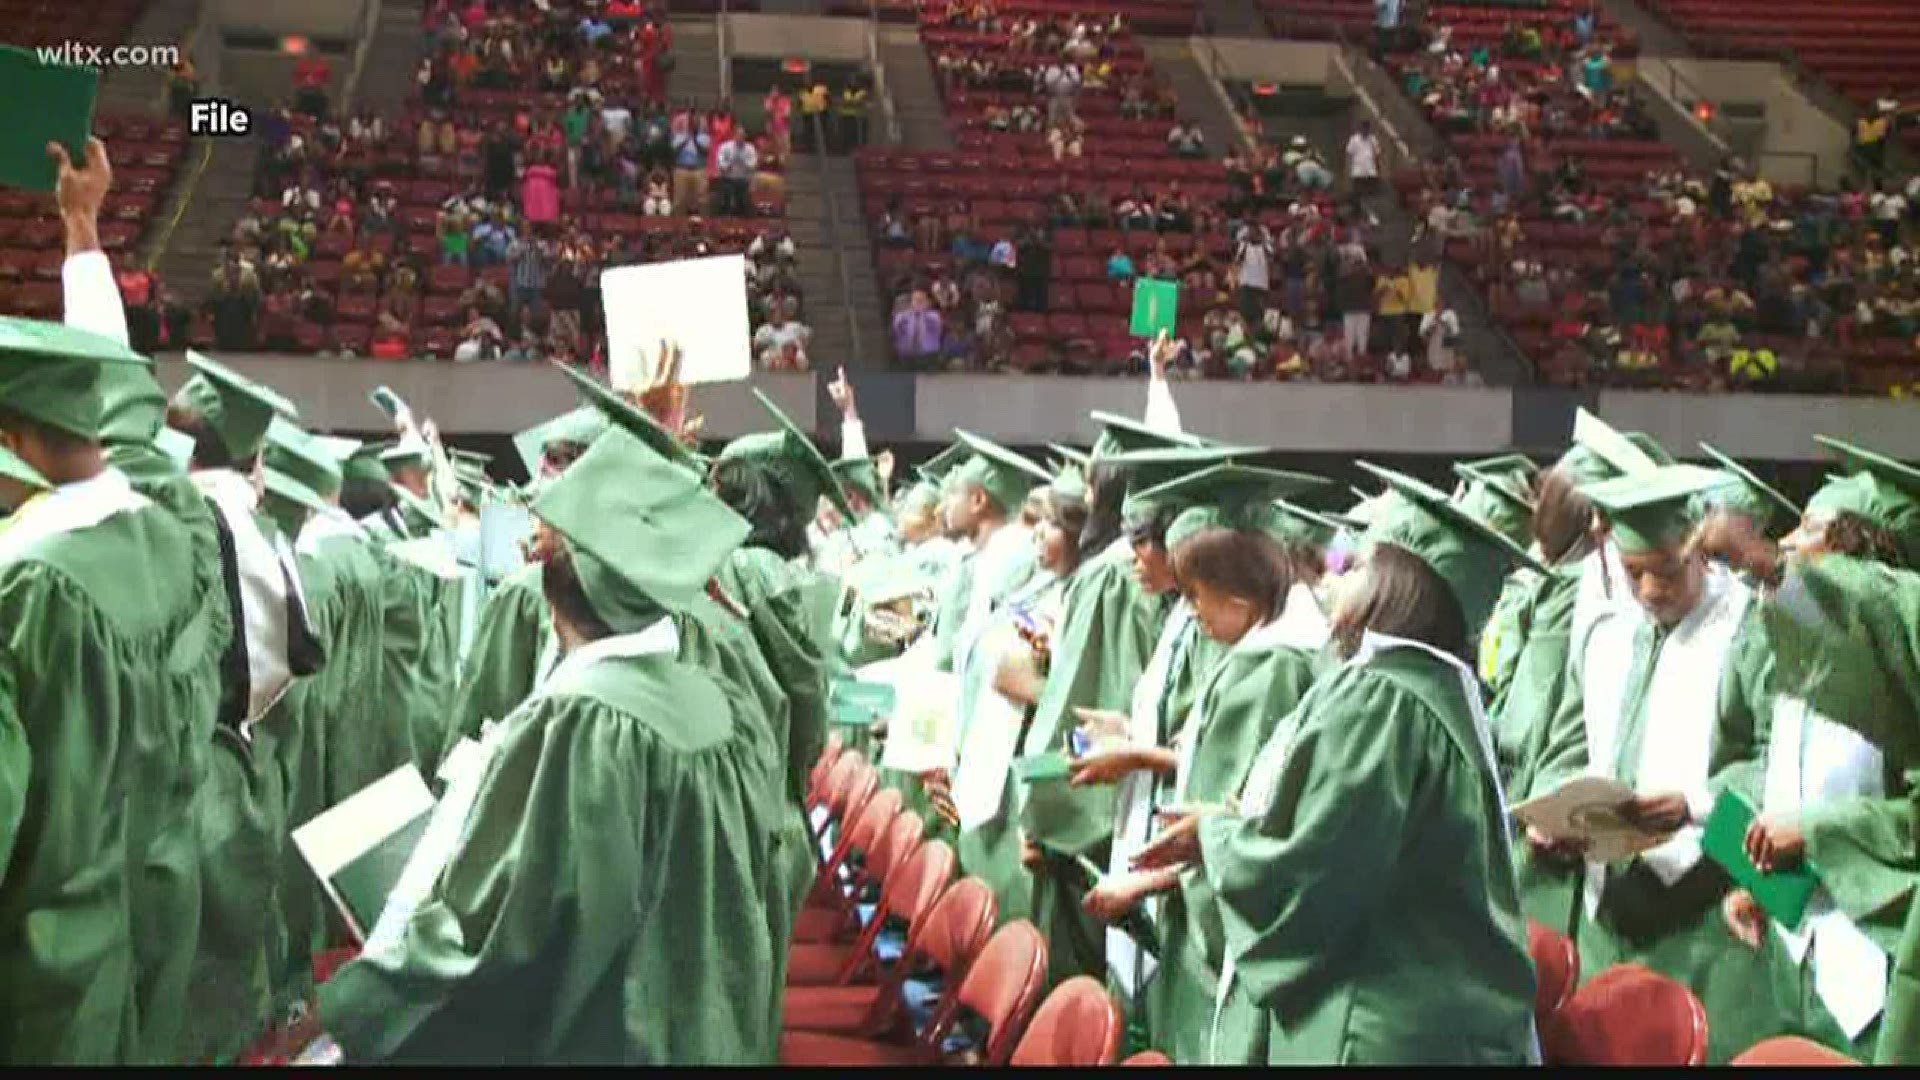 Many are wondering if they will be able to walk across the stage to get their diploma